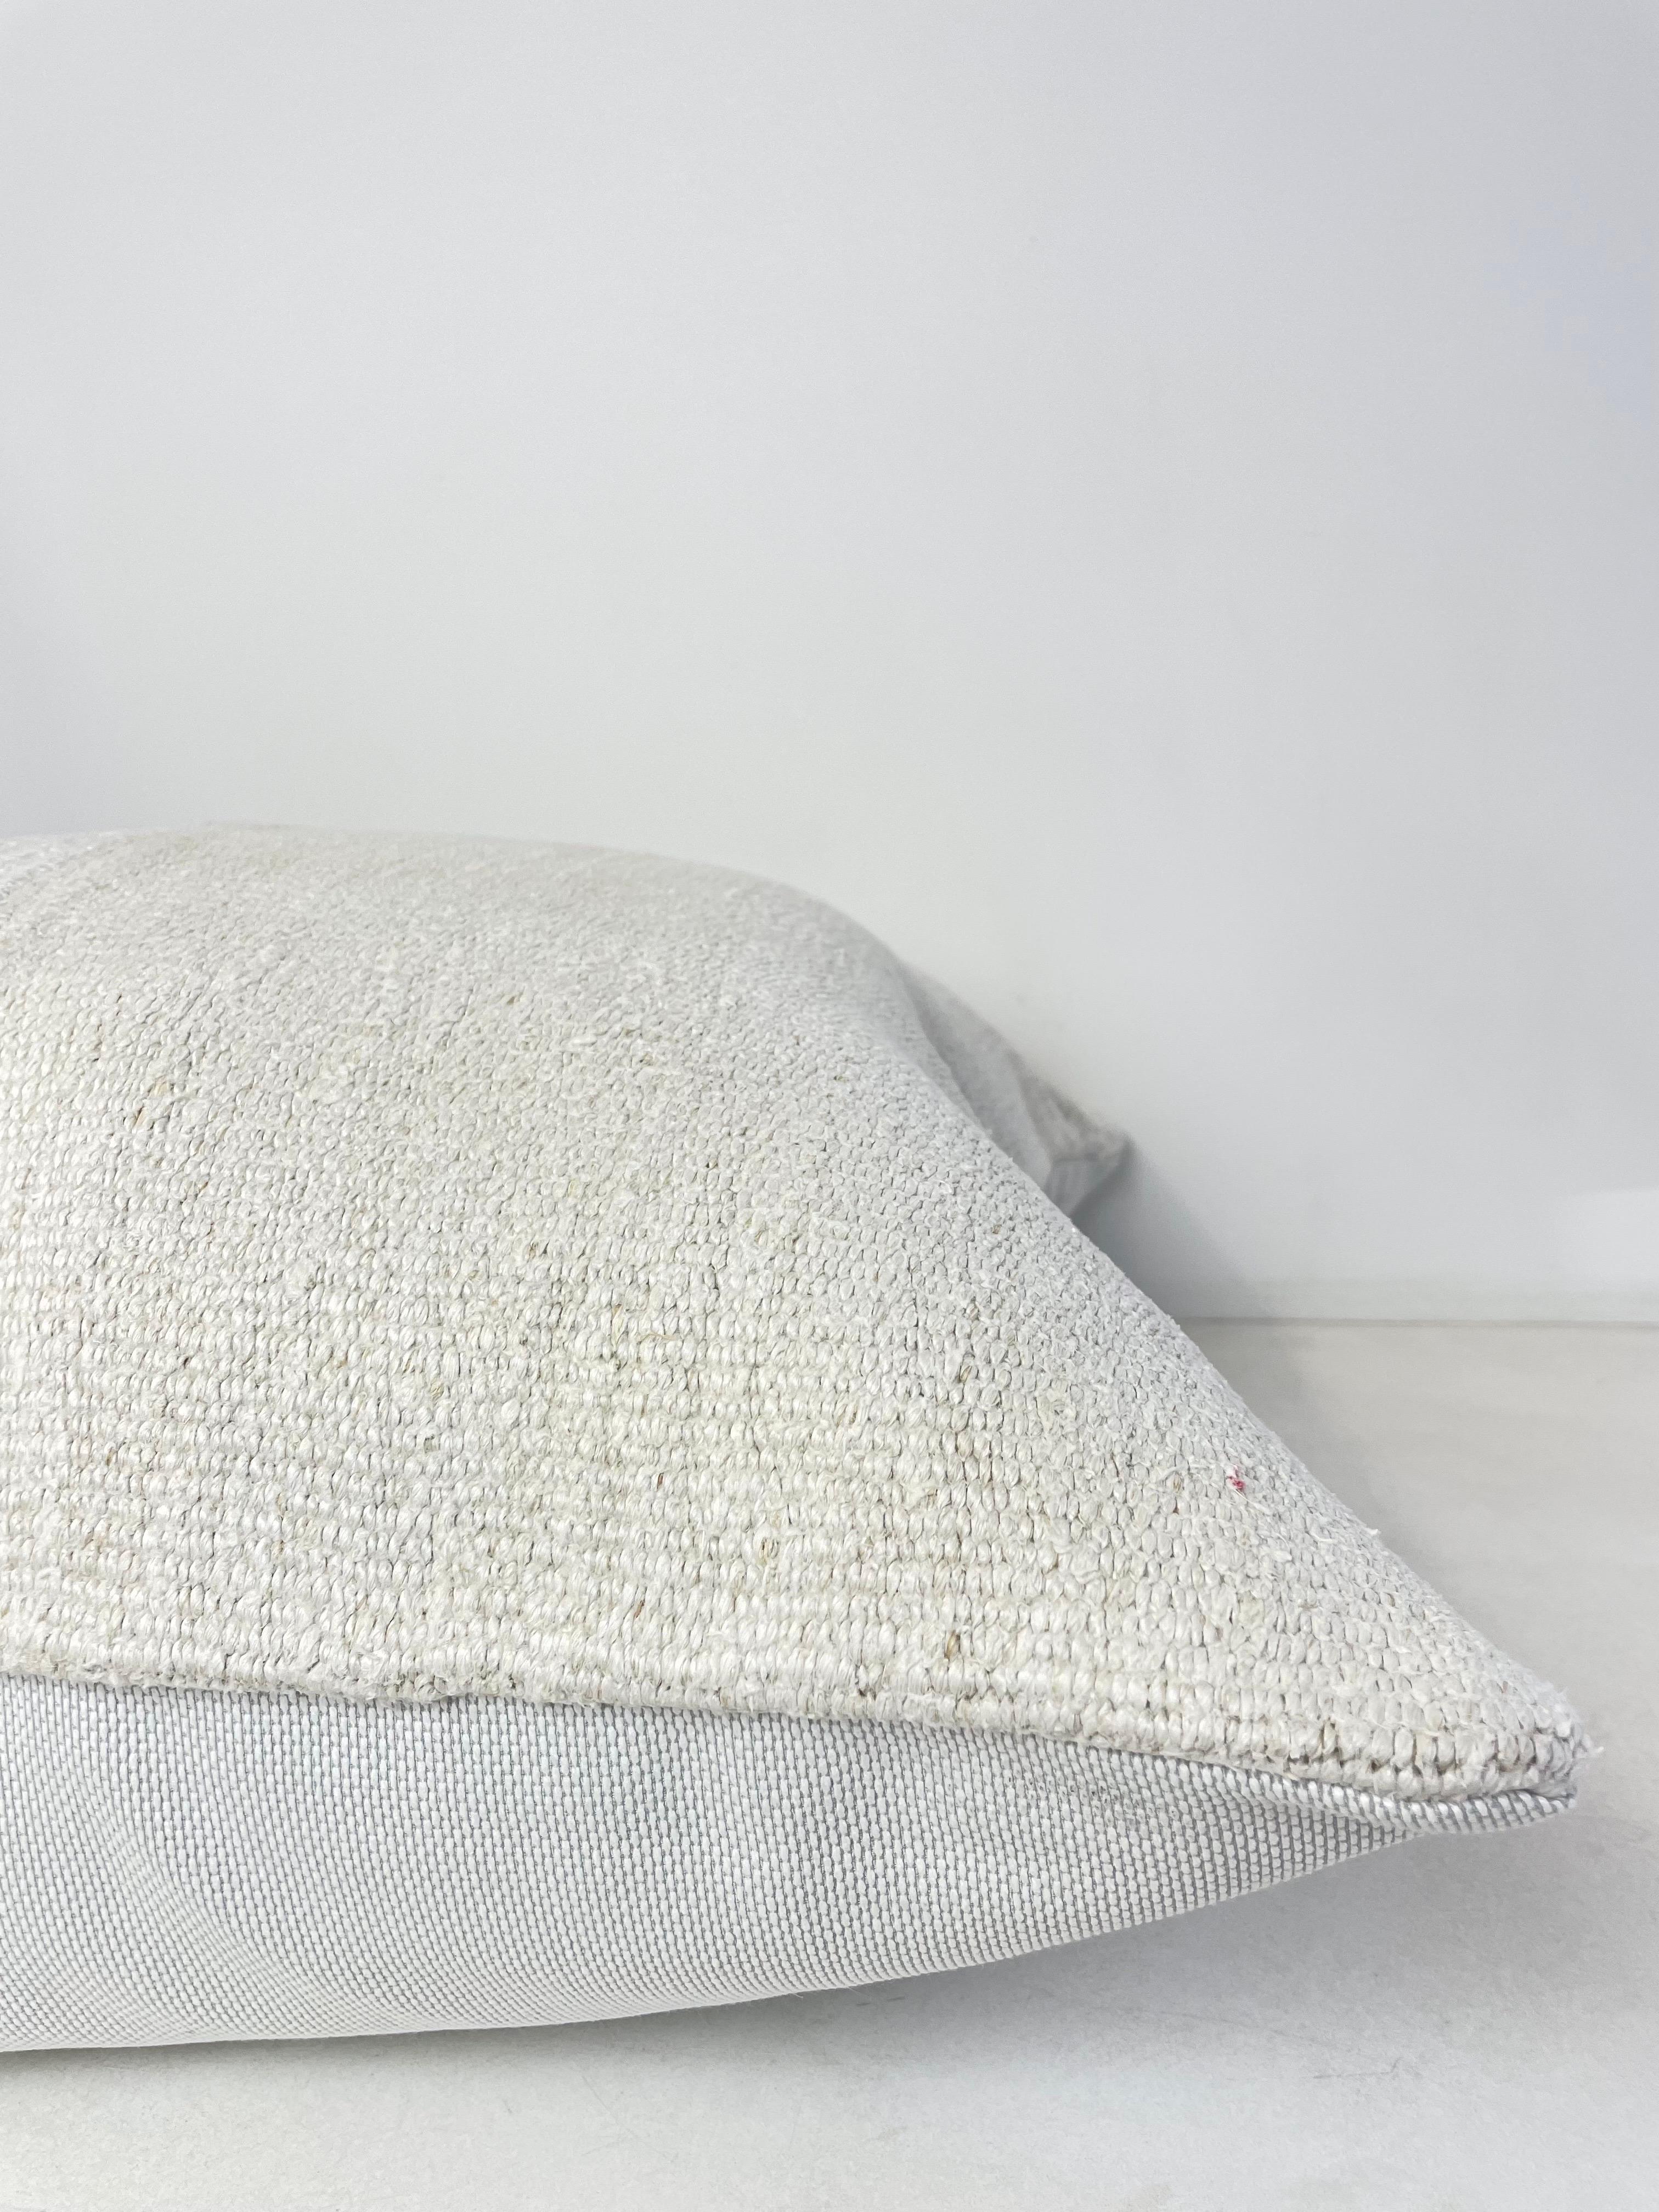 Creamy white hemp rug patchwork style pillow. Unique patchwork pillow has been made with parts of different Turkish rugs, in multiple white tones. Solid fabric backing, and hidden zipper closure. Spot cleaning is recommended, or dry clean. These